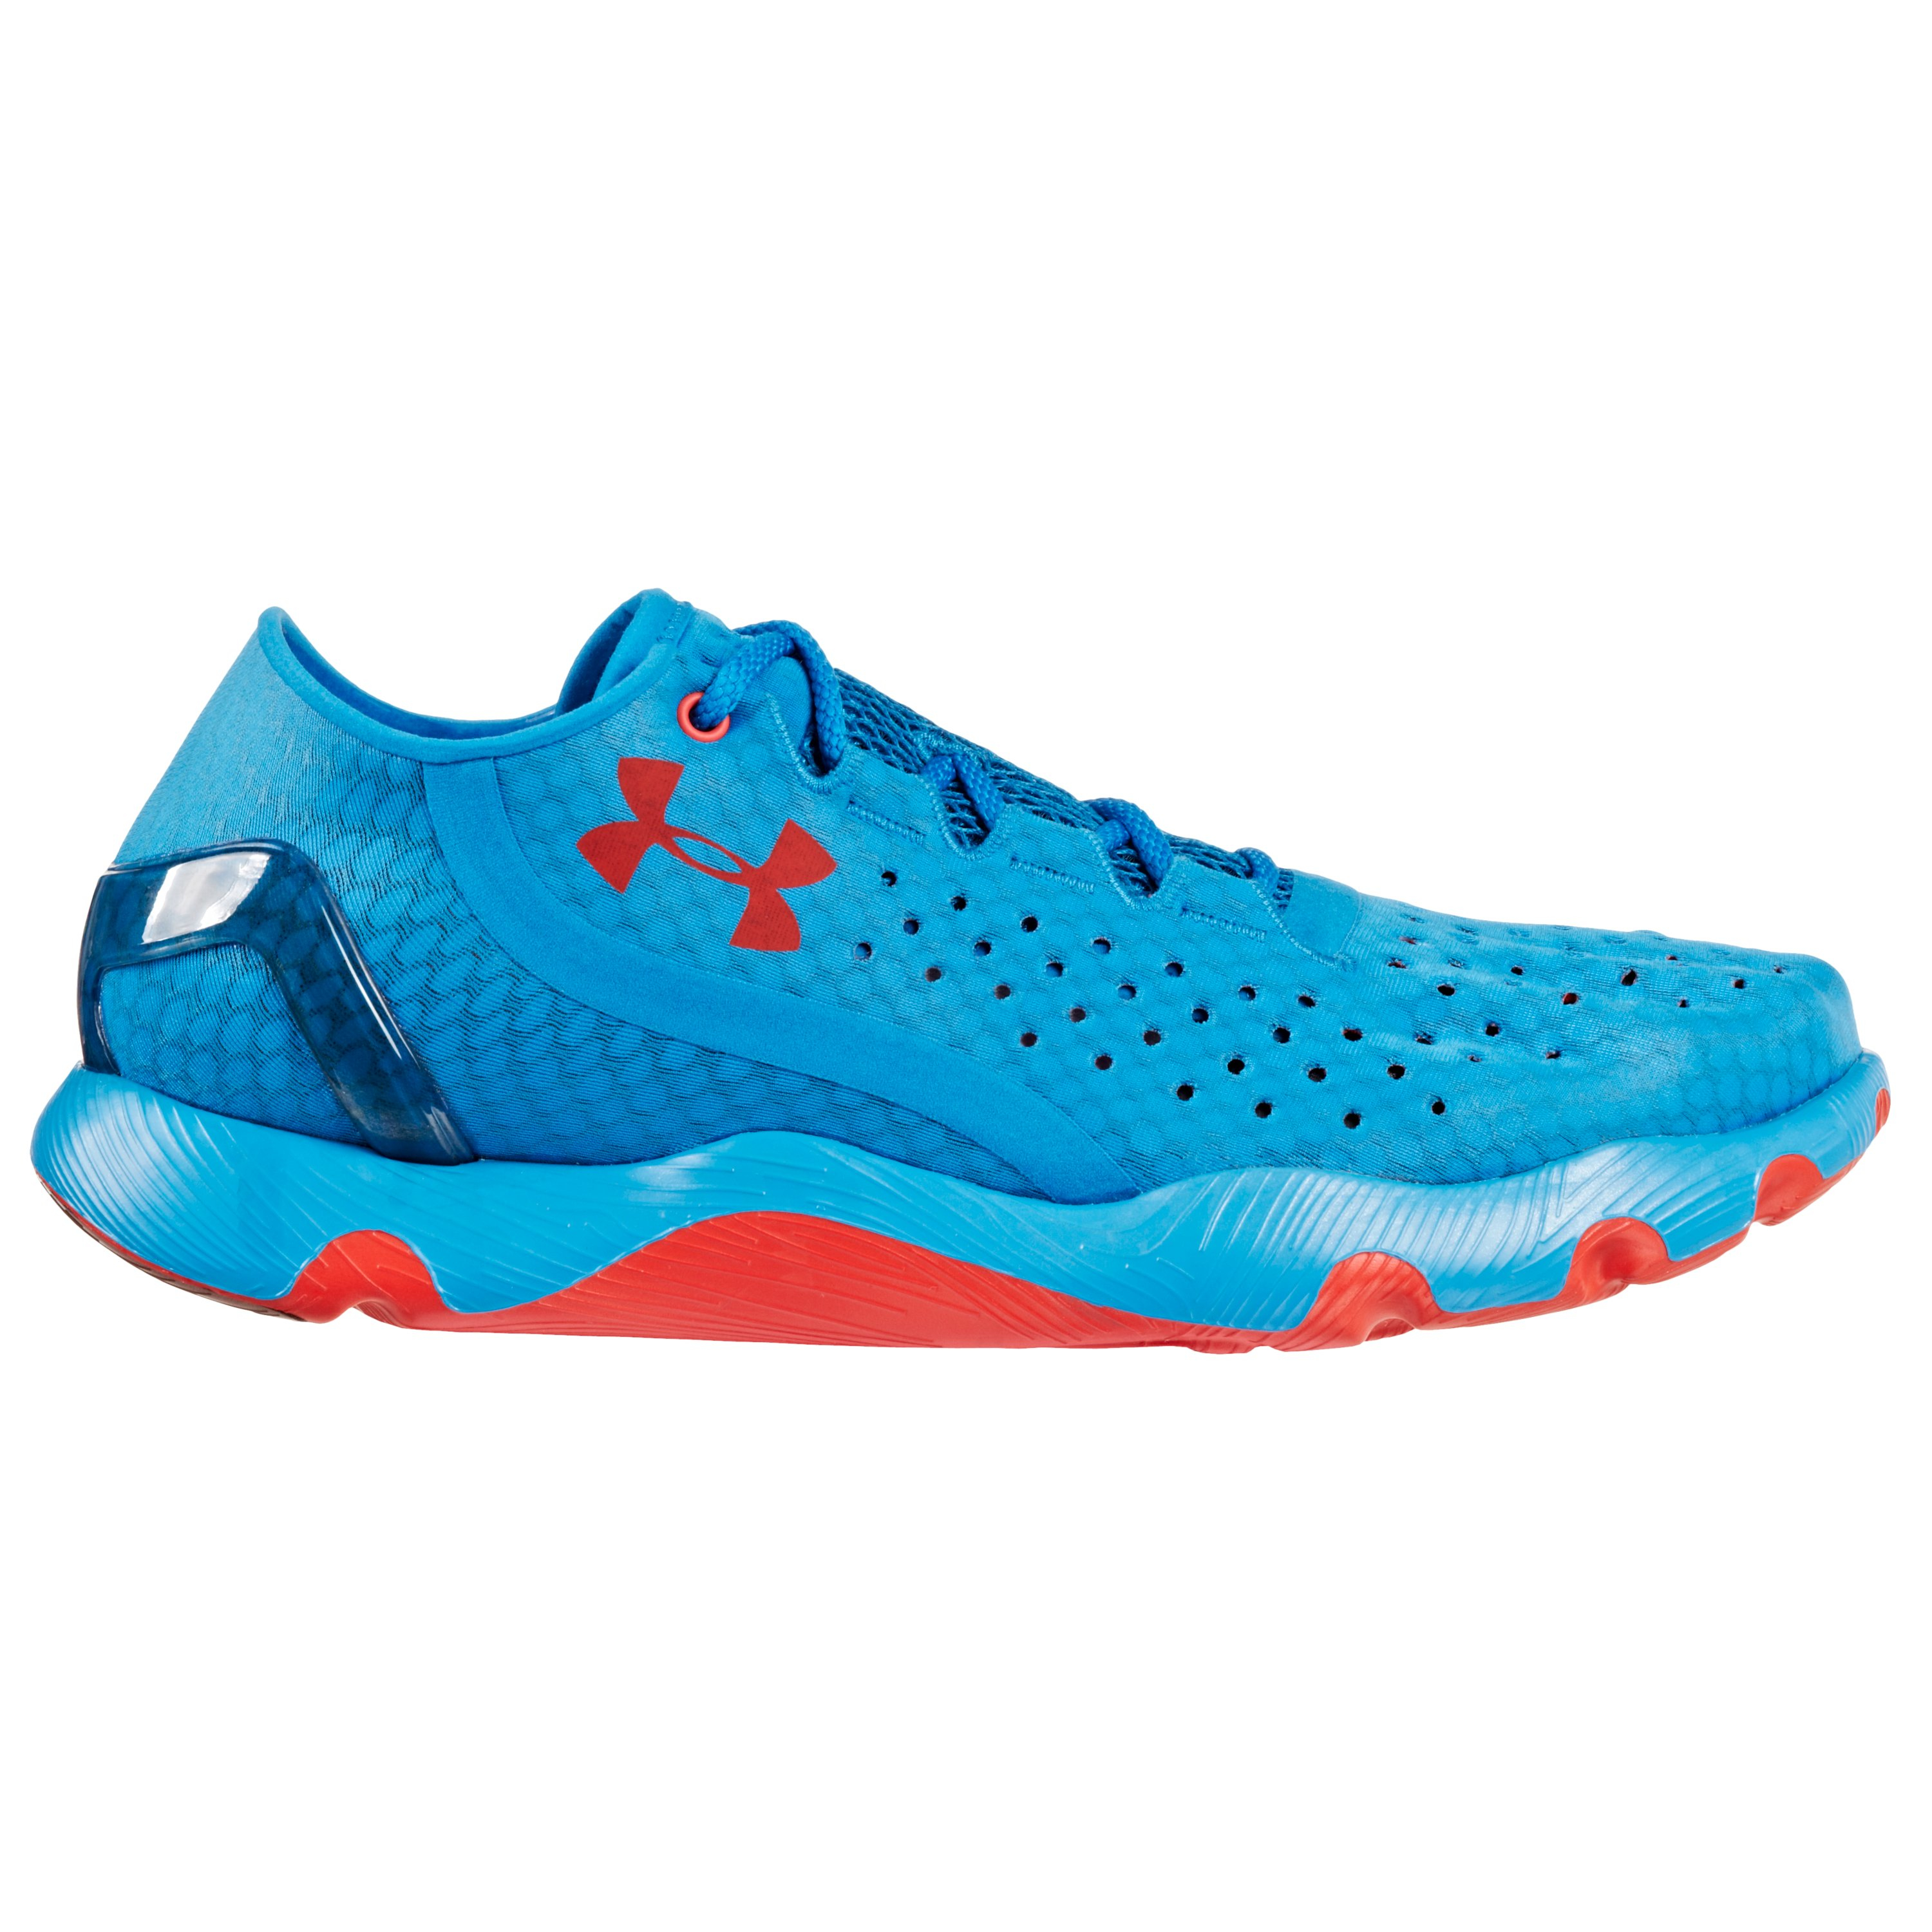 Under Armour Ua Speedform® Rc Running Shoes in Electric Blue/ (Blue ...